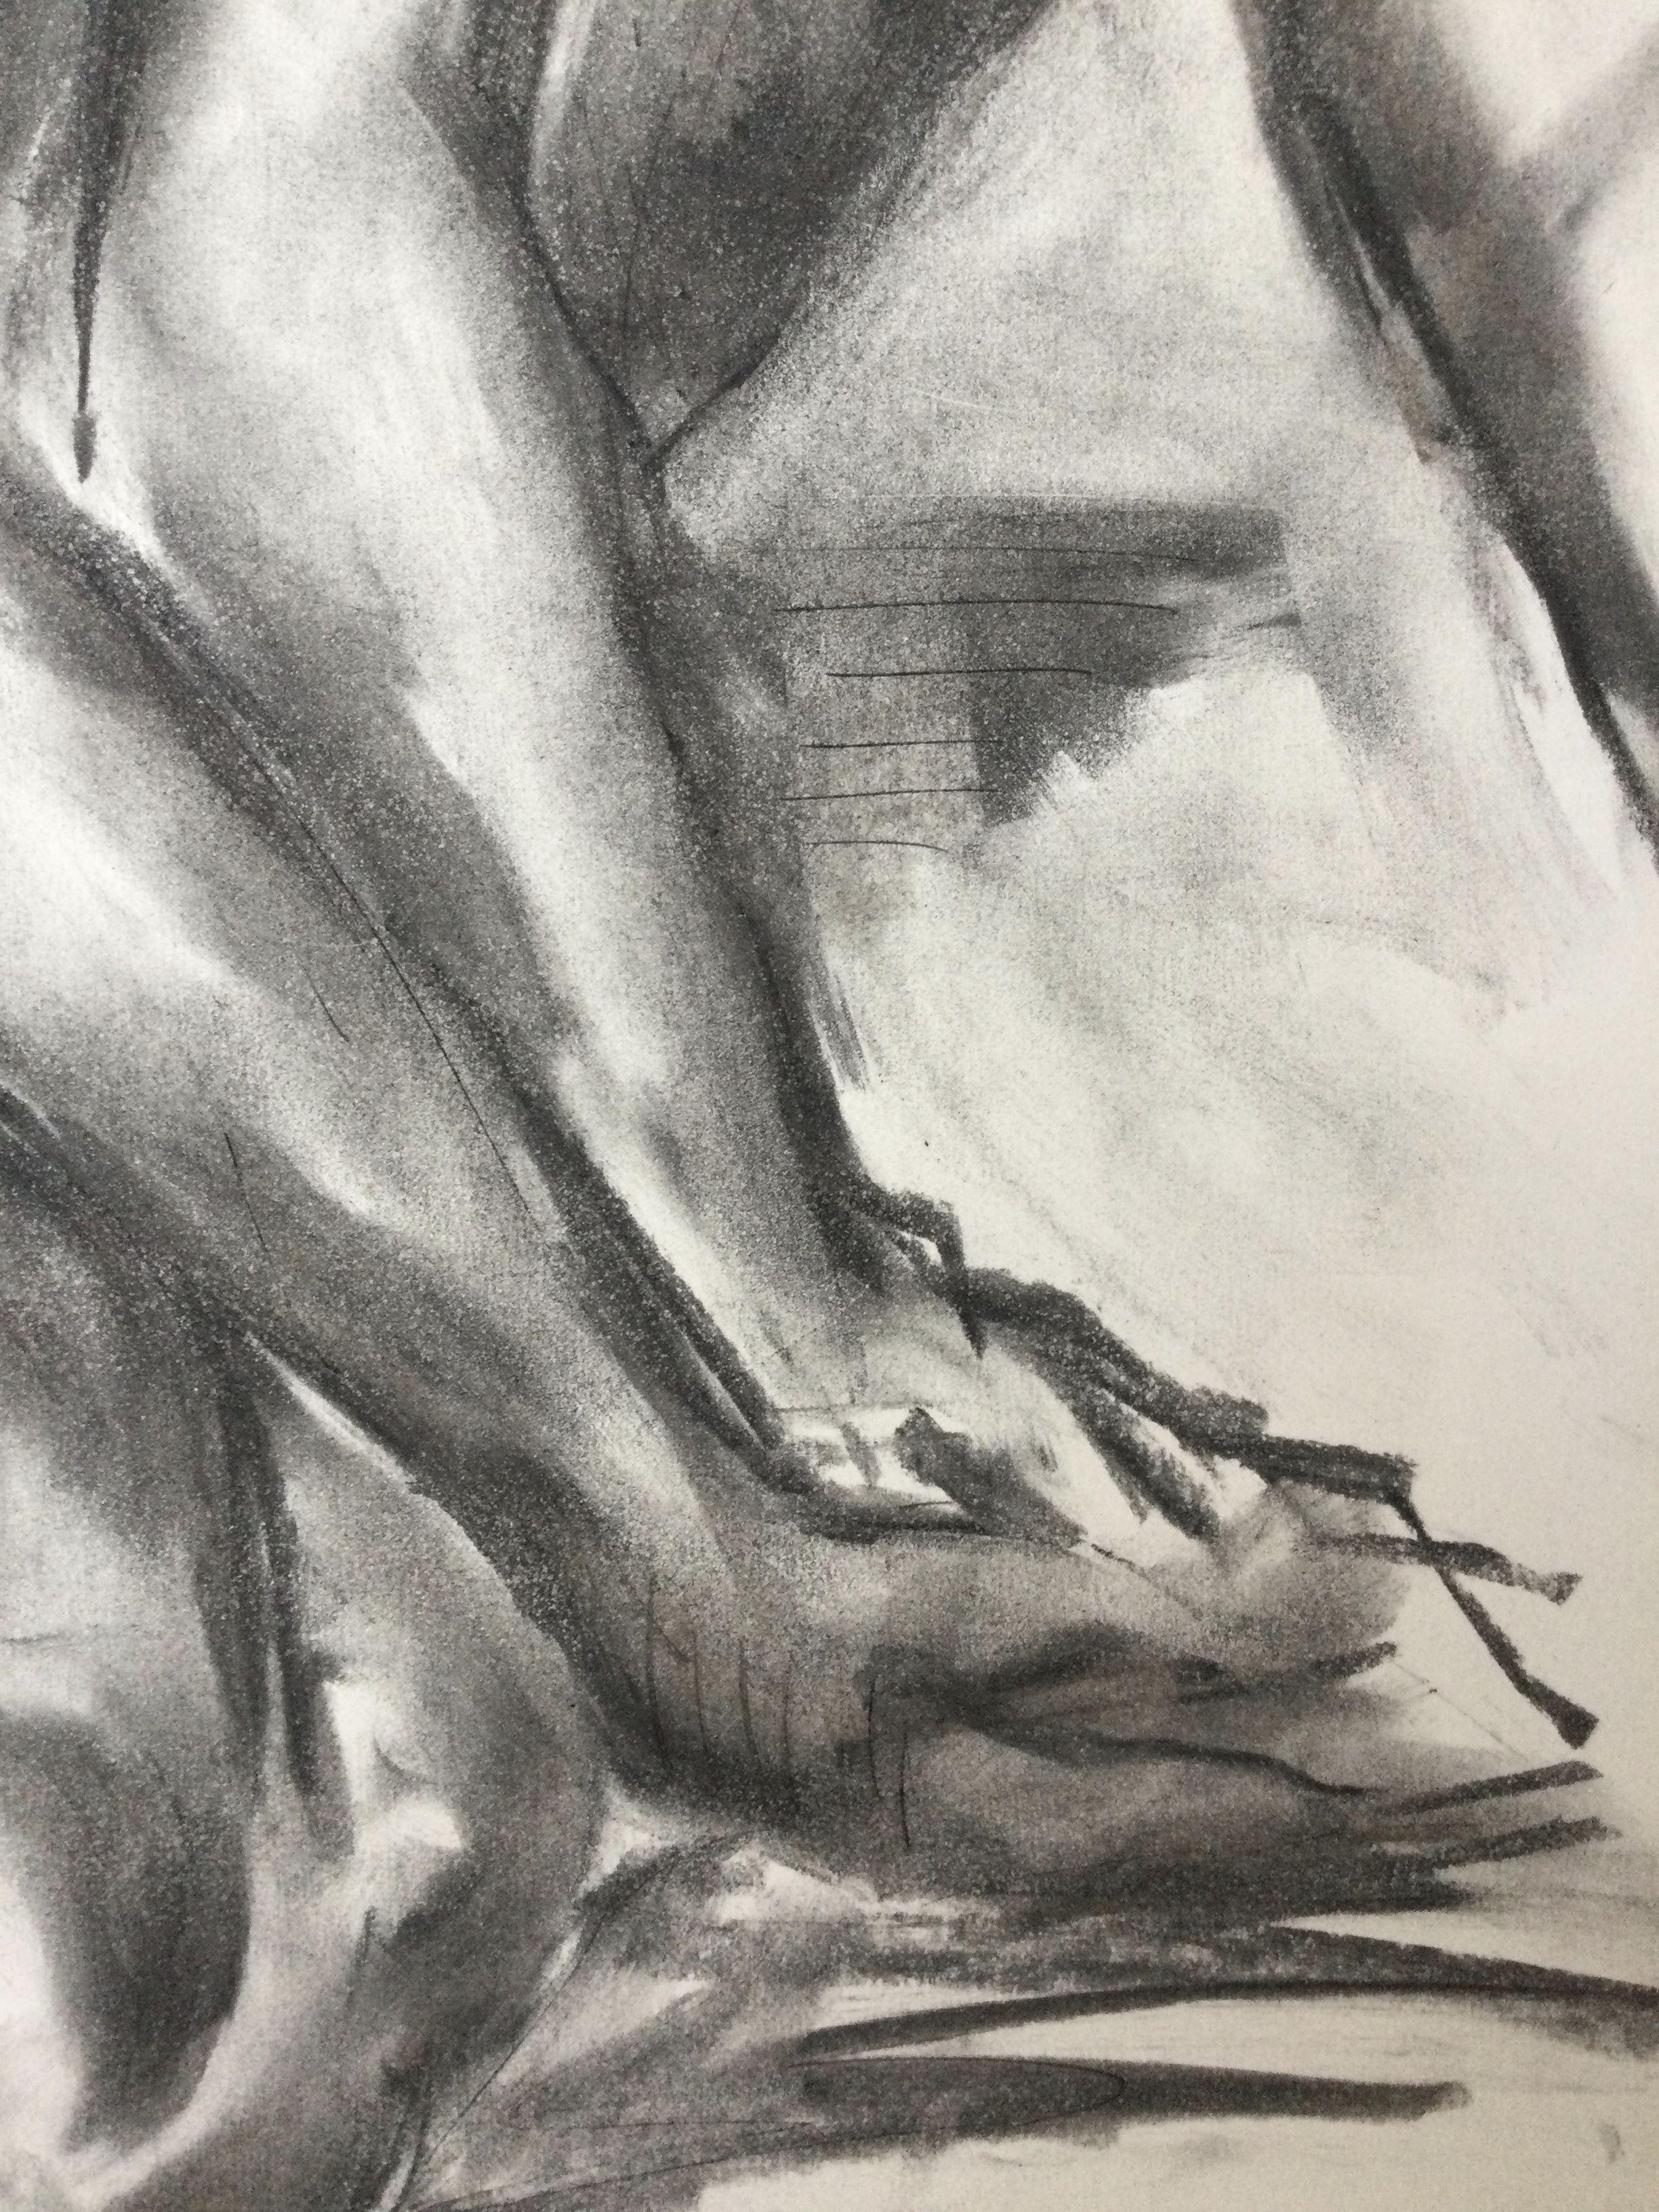 No Words, Drawing, Charcoal on Paper 1